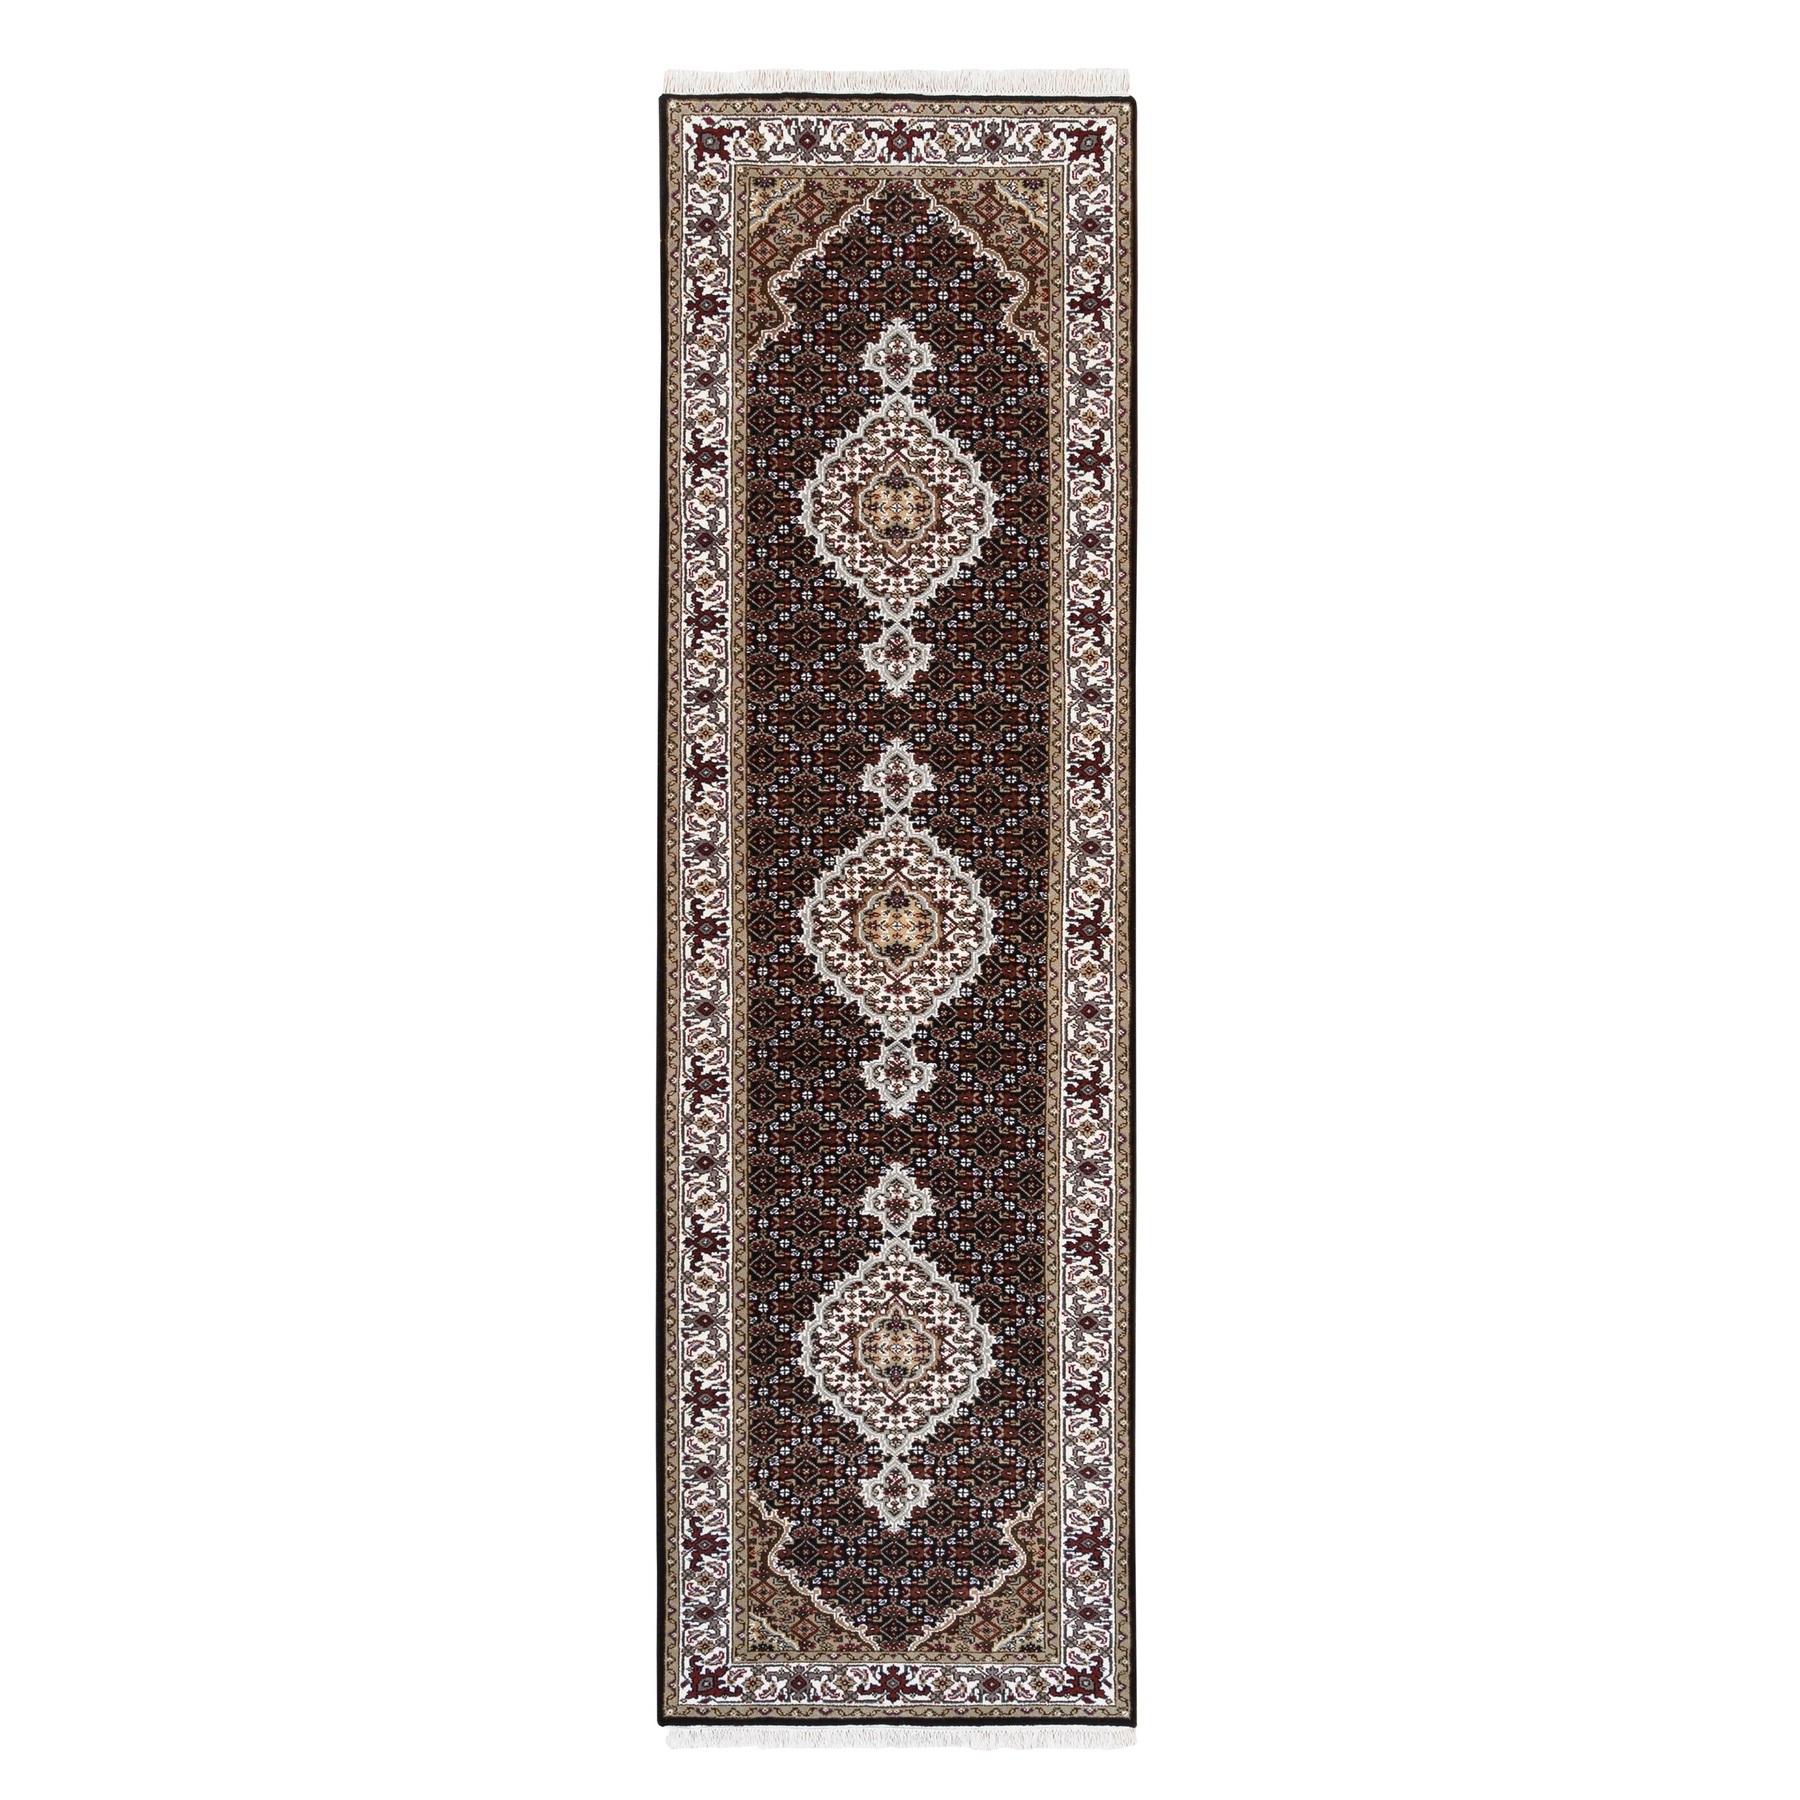 Pirniakan Collection Hand Knotted Black Rug No: 1125008